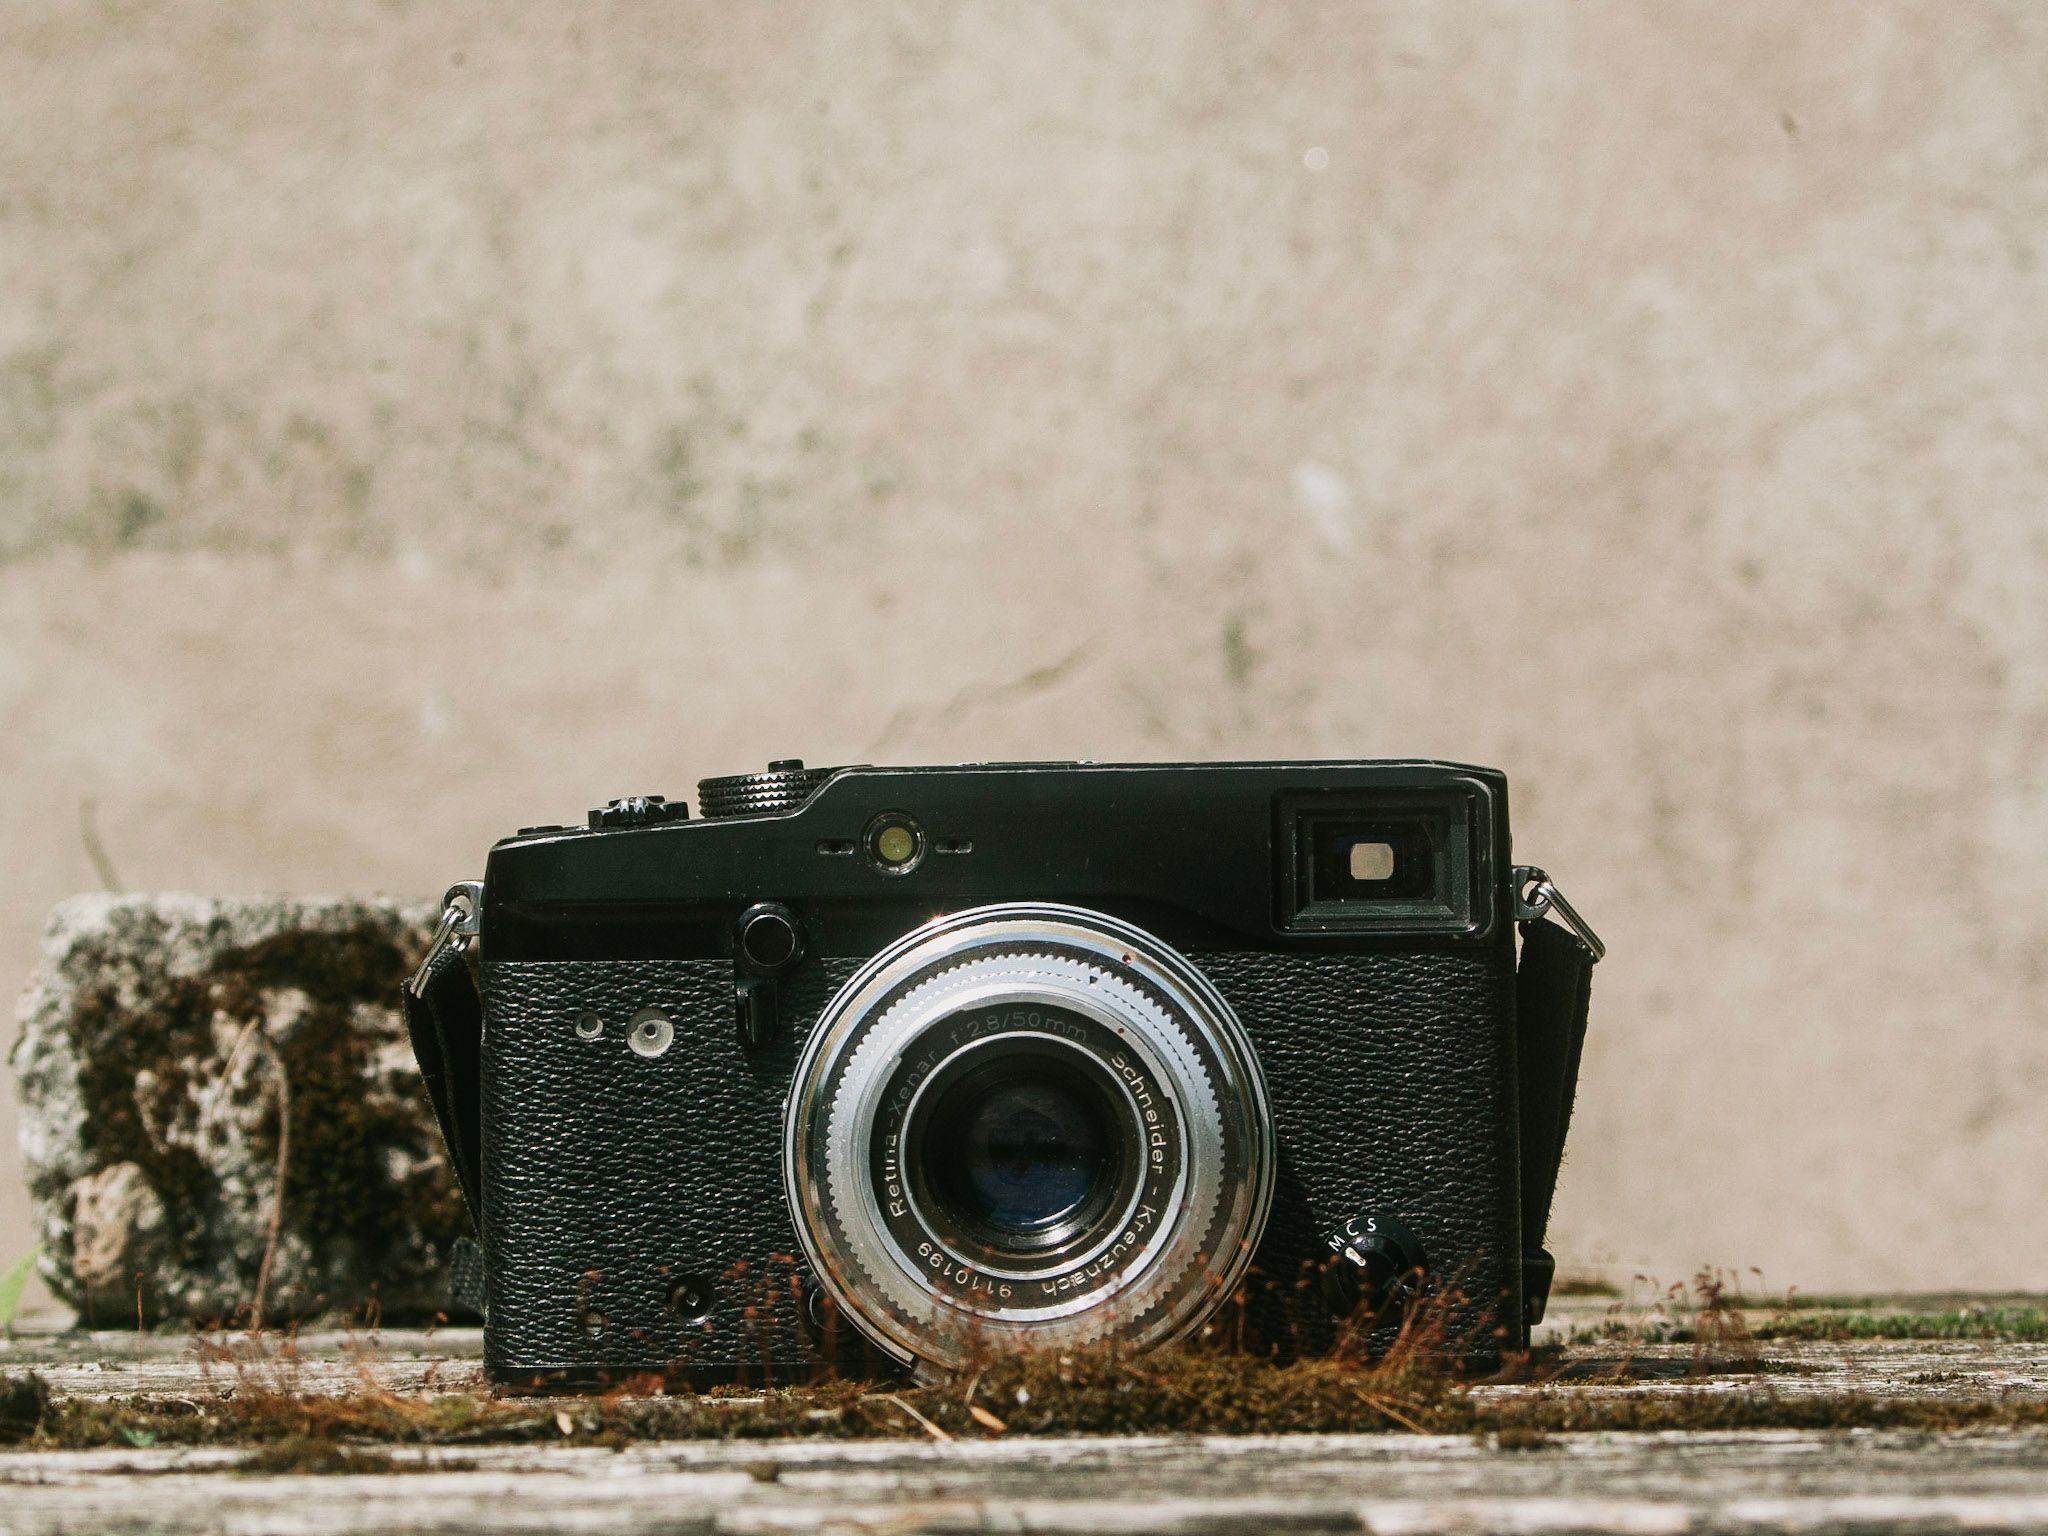 How The Fujifilm X Pro 4 Can be a Successful Camera